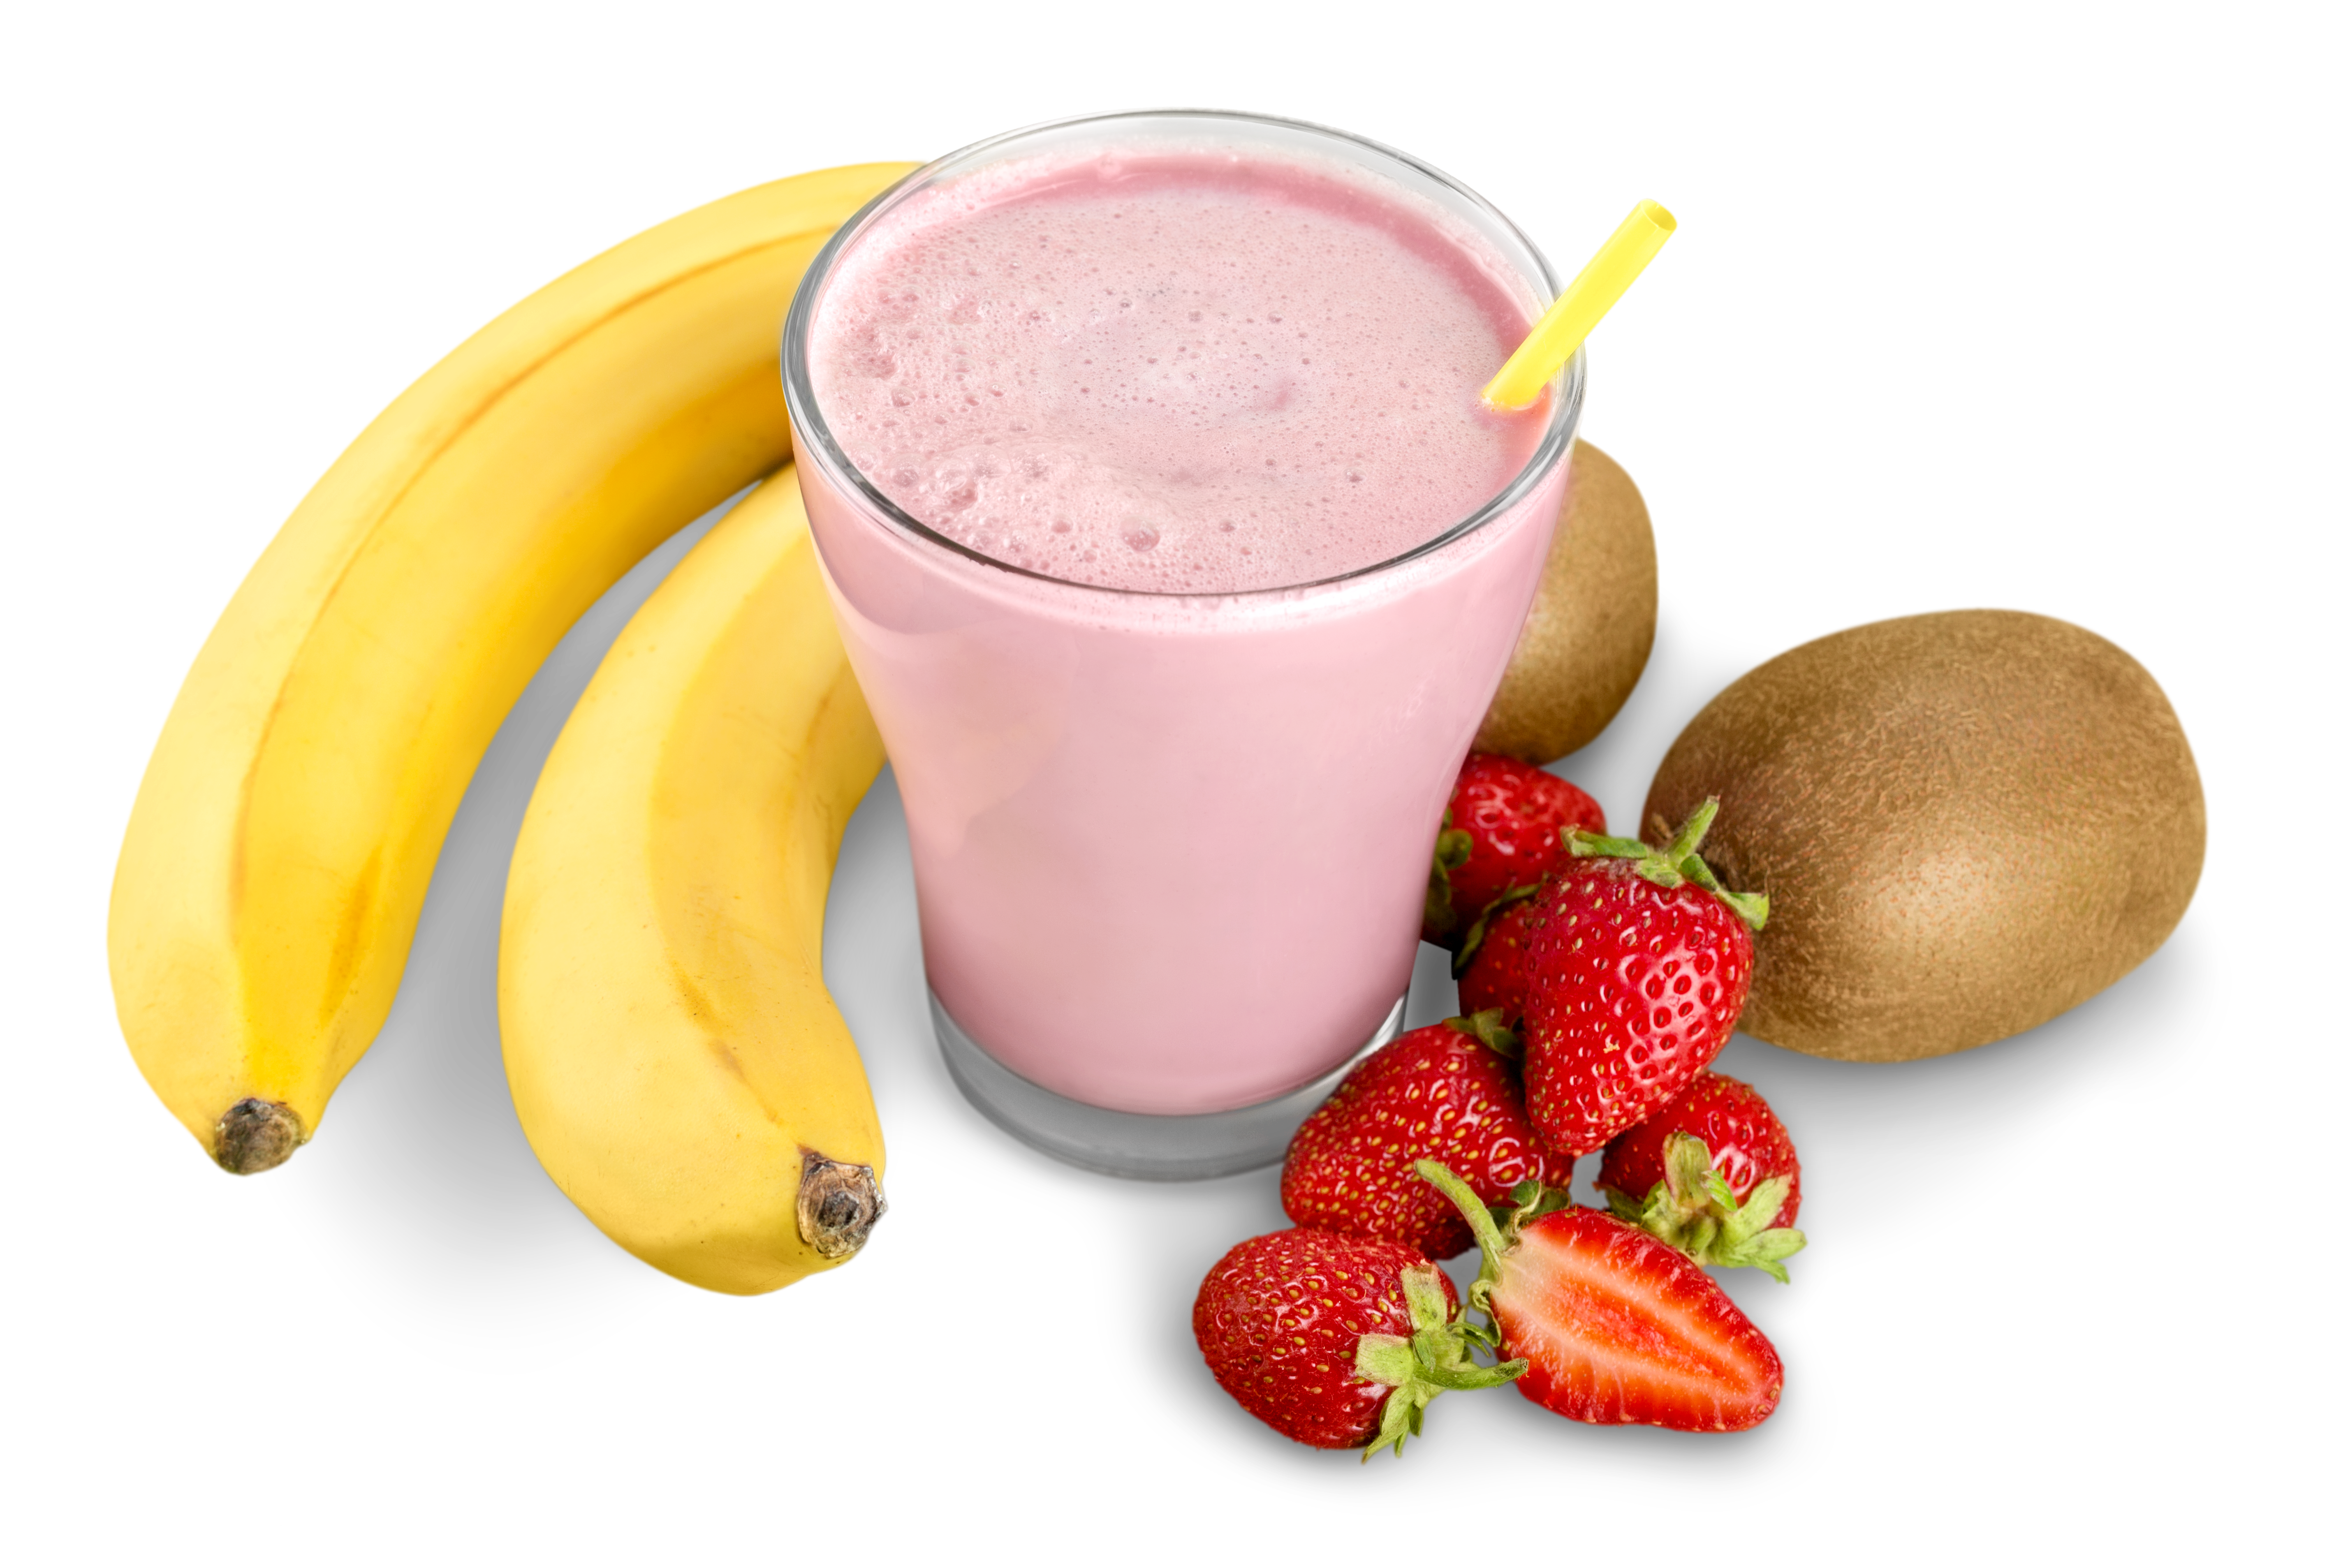 A photo of a pink smoothie surrounded by bananas, strawberries, and kiwi fruit